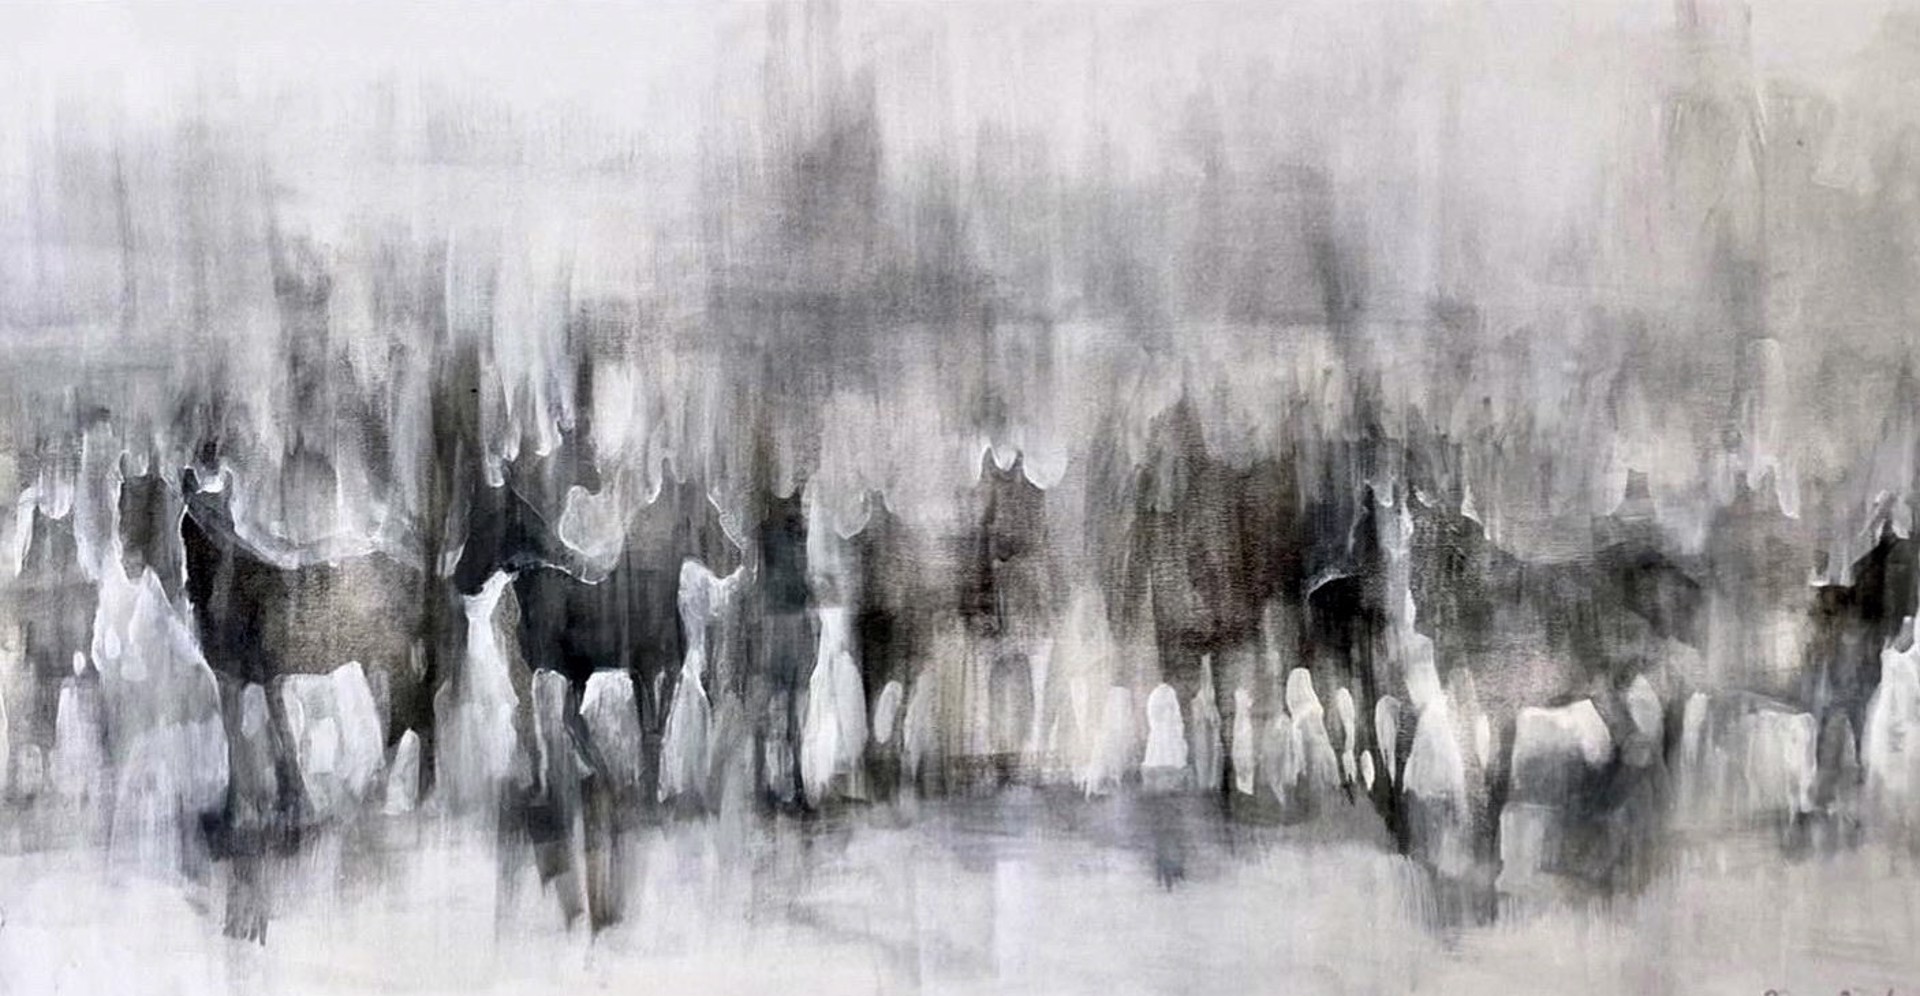 Original Mixed Media Painting By Taryn Boals Featuring A Group of Horses In Ghostly Black And White Silhouette